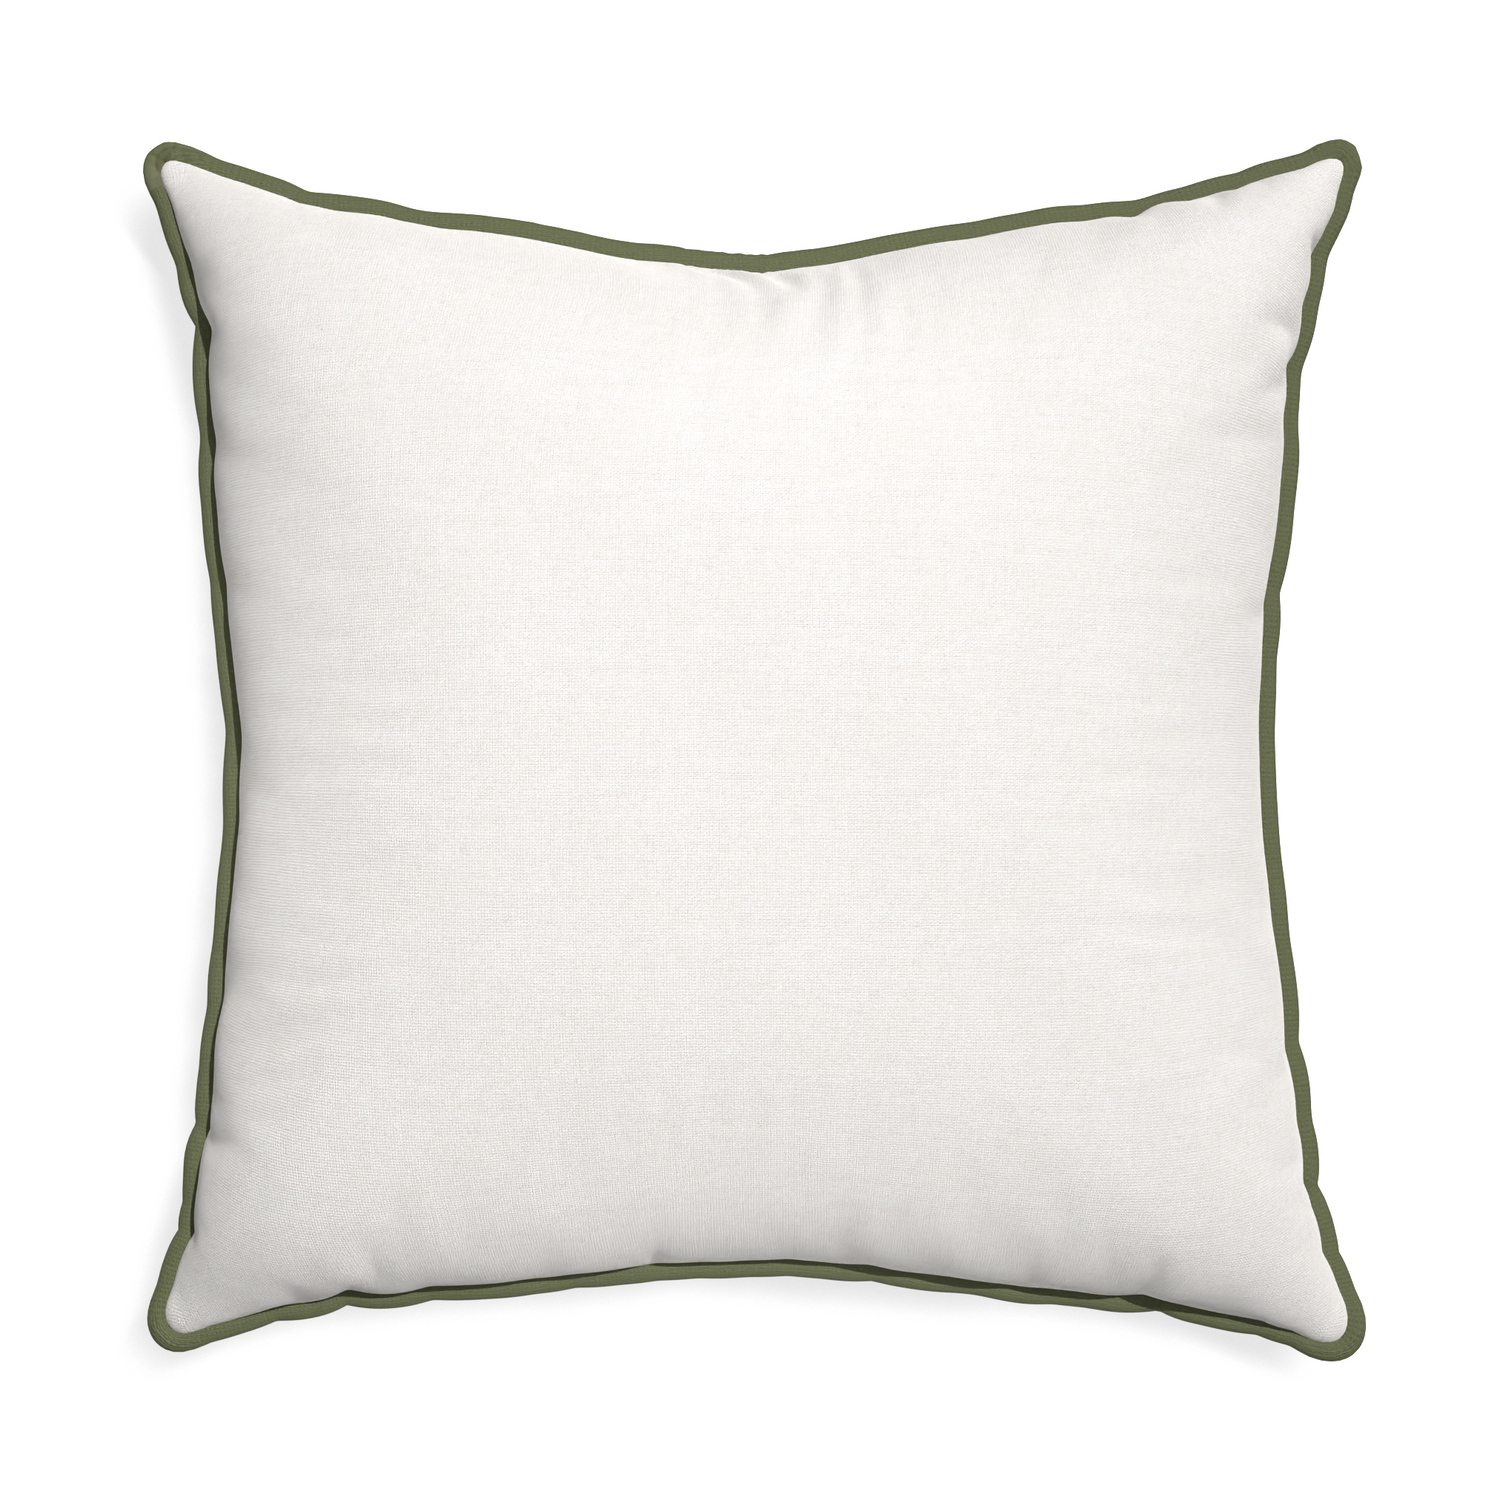 Euro-sham flour custom pillow with f piping on white background